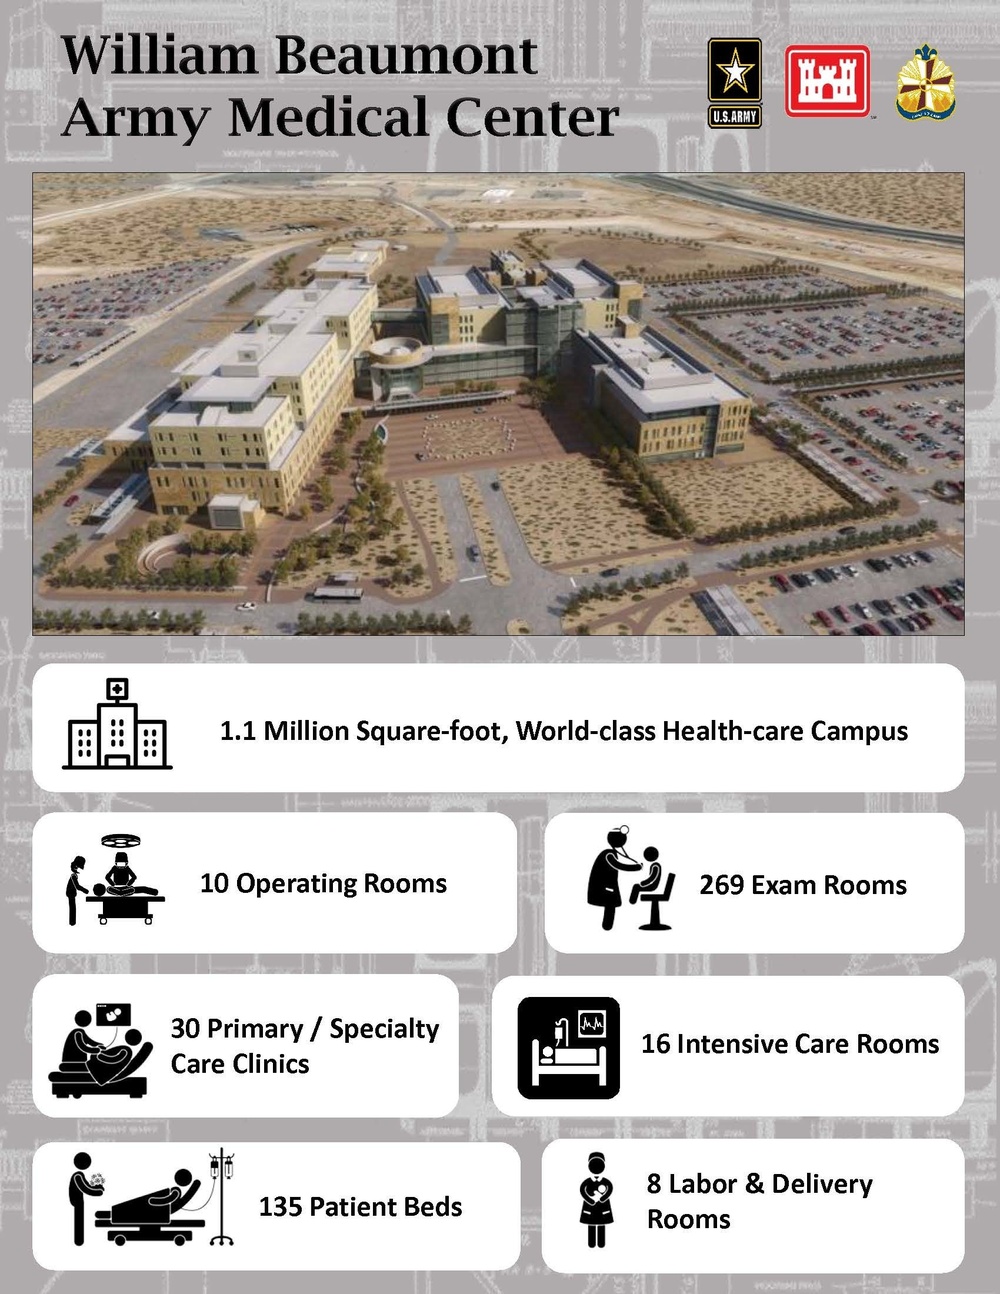 The new William Beaumont Army Medical Center